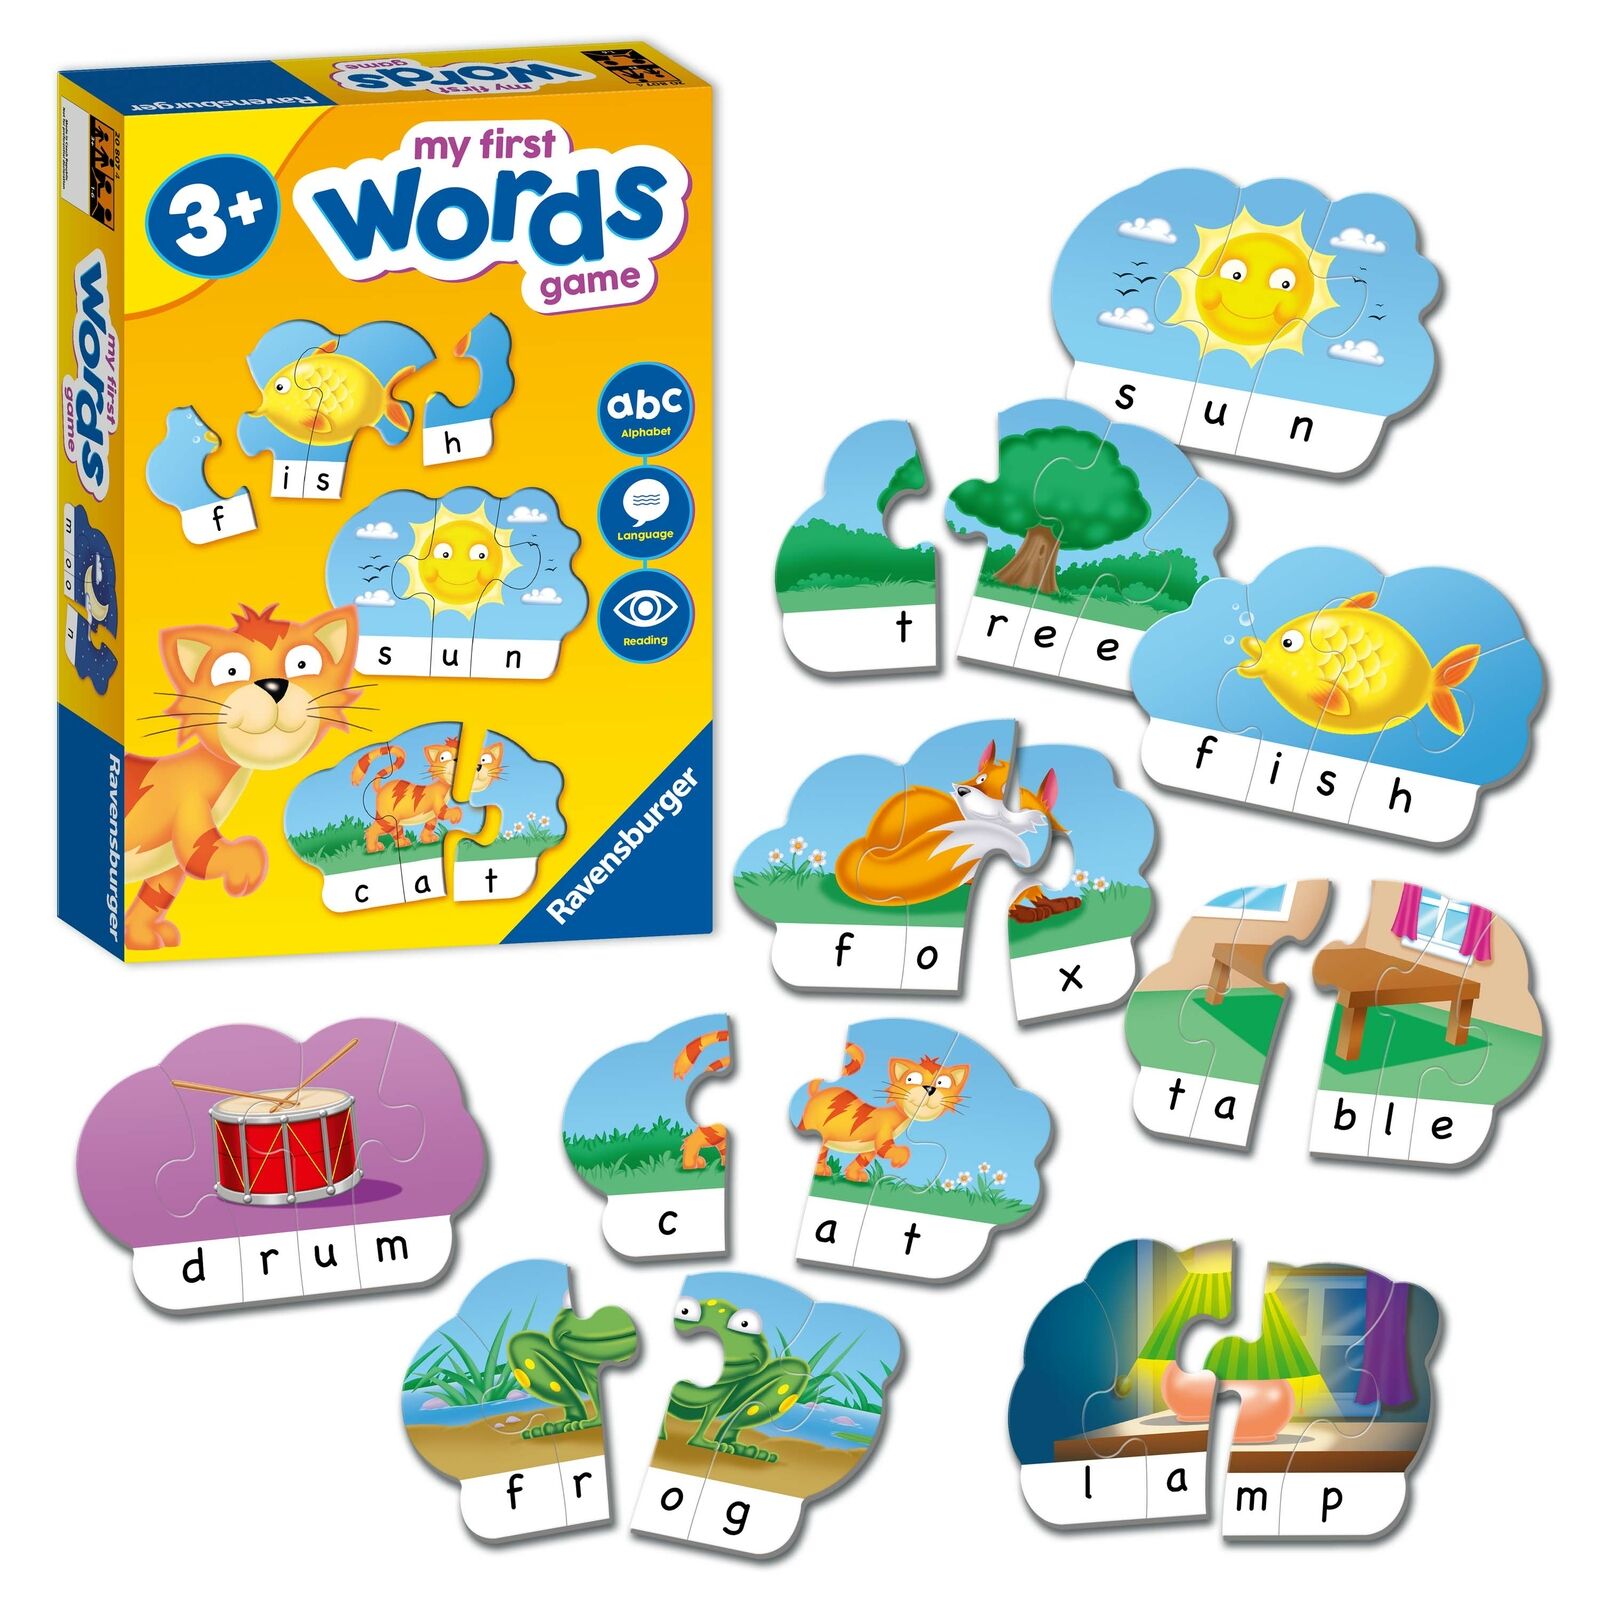 20807 Ravensburger My First Word Card Match Game Children Toddler Age 3 Years+